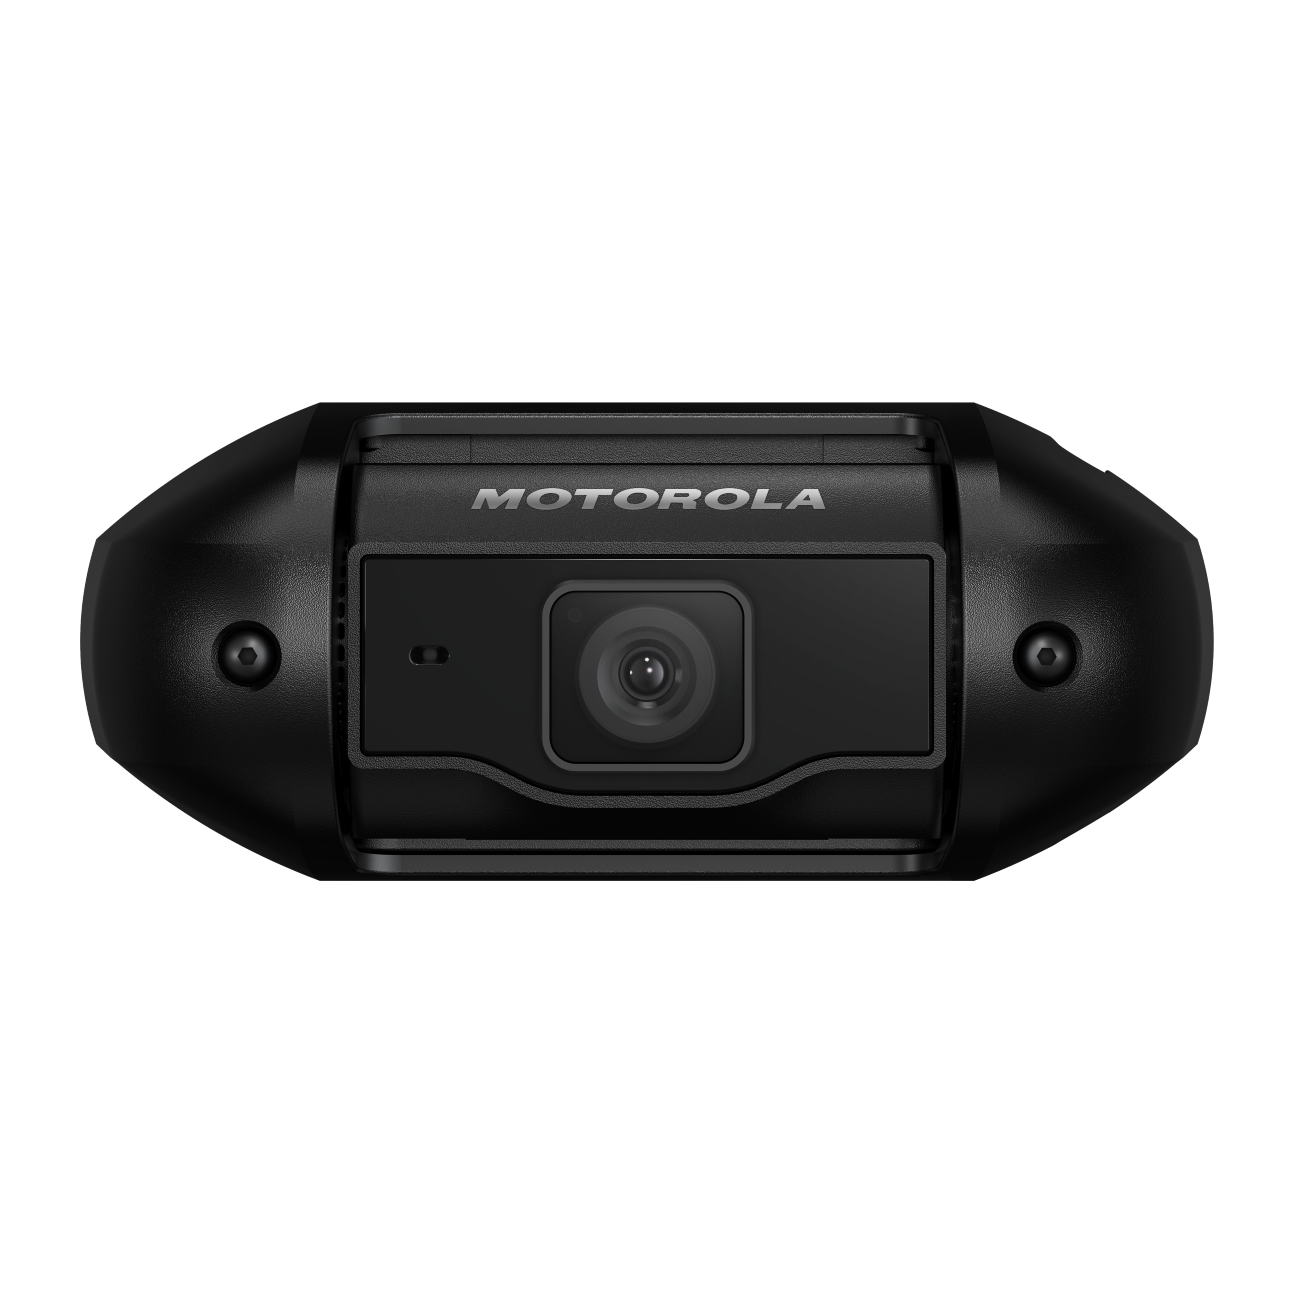 M5P cabin camera, front